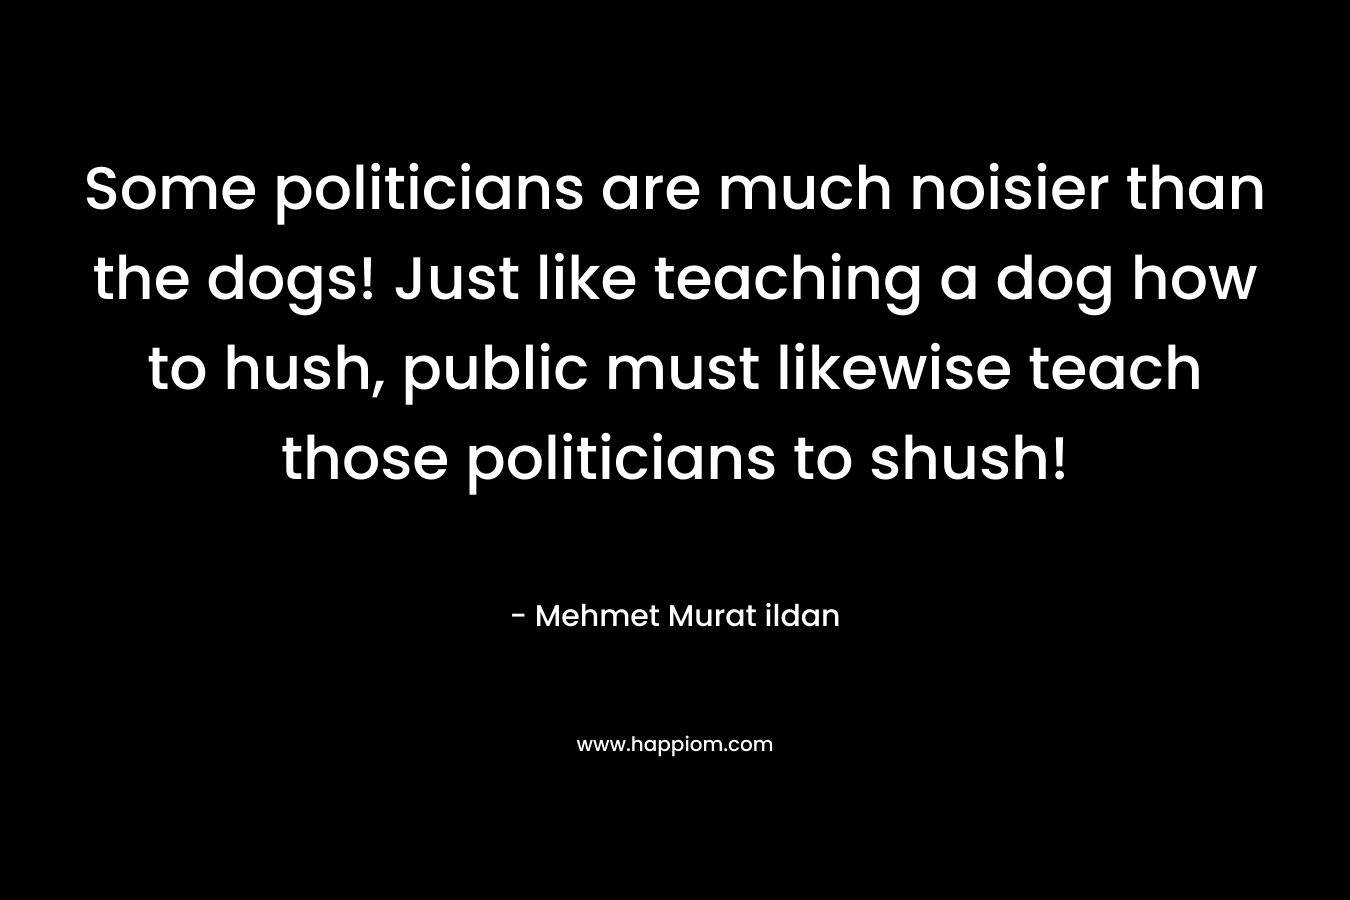 Some politicians are much noisier than the dogs! Just like teaching a dog how to hush, public must likewise teach those politicians to shush!